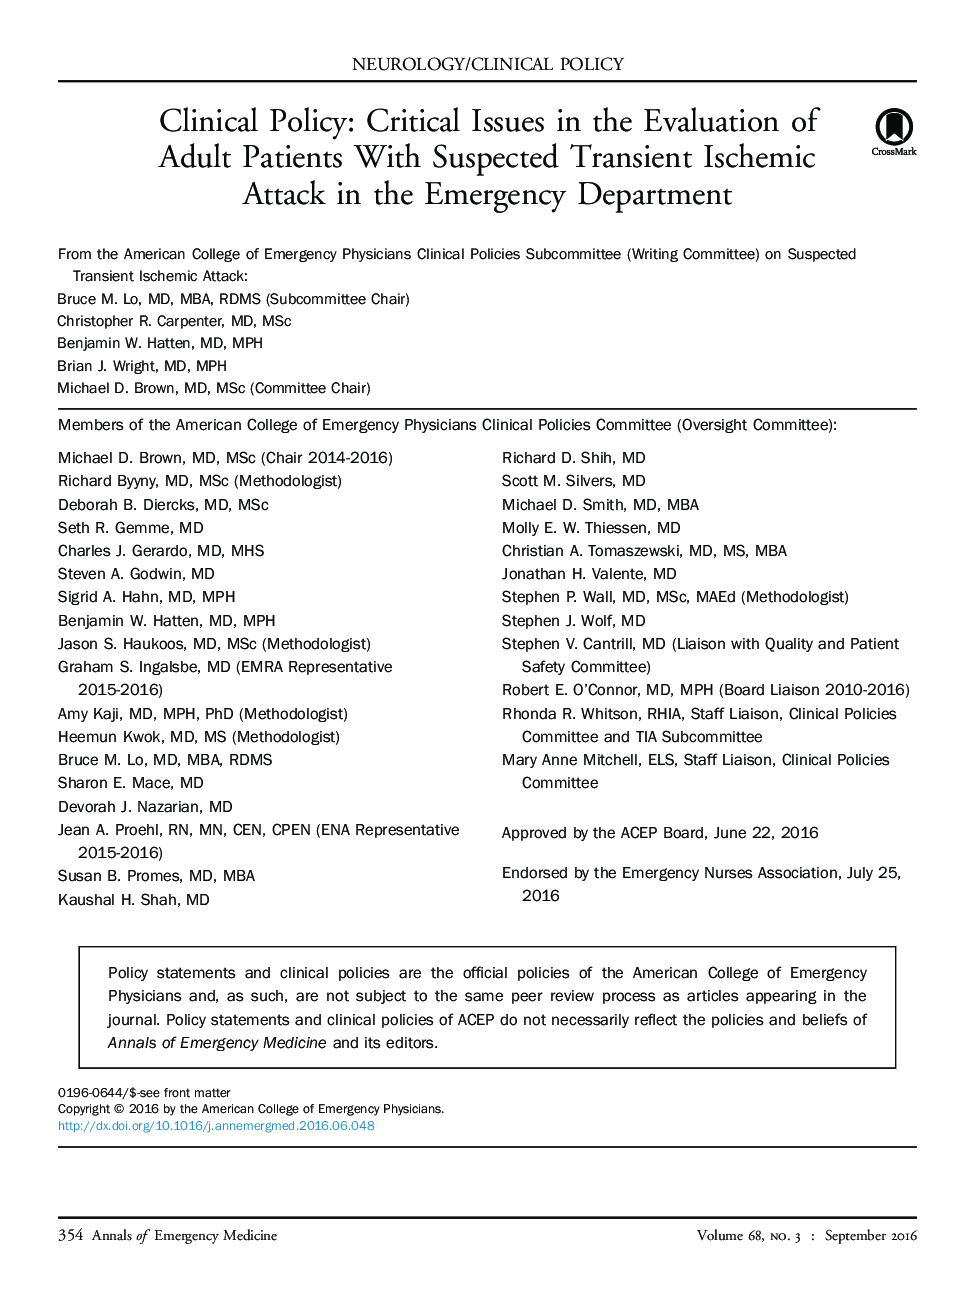 Clinical Policy: Critical Issues in the Evaluation of Adult Patients With Suspected Transient Ischemic Attack in the Emergency Department